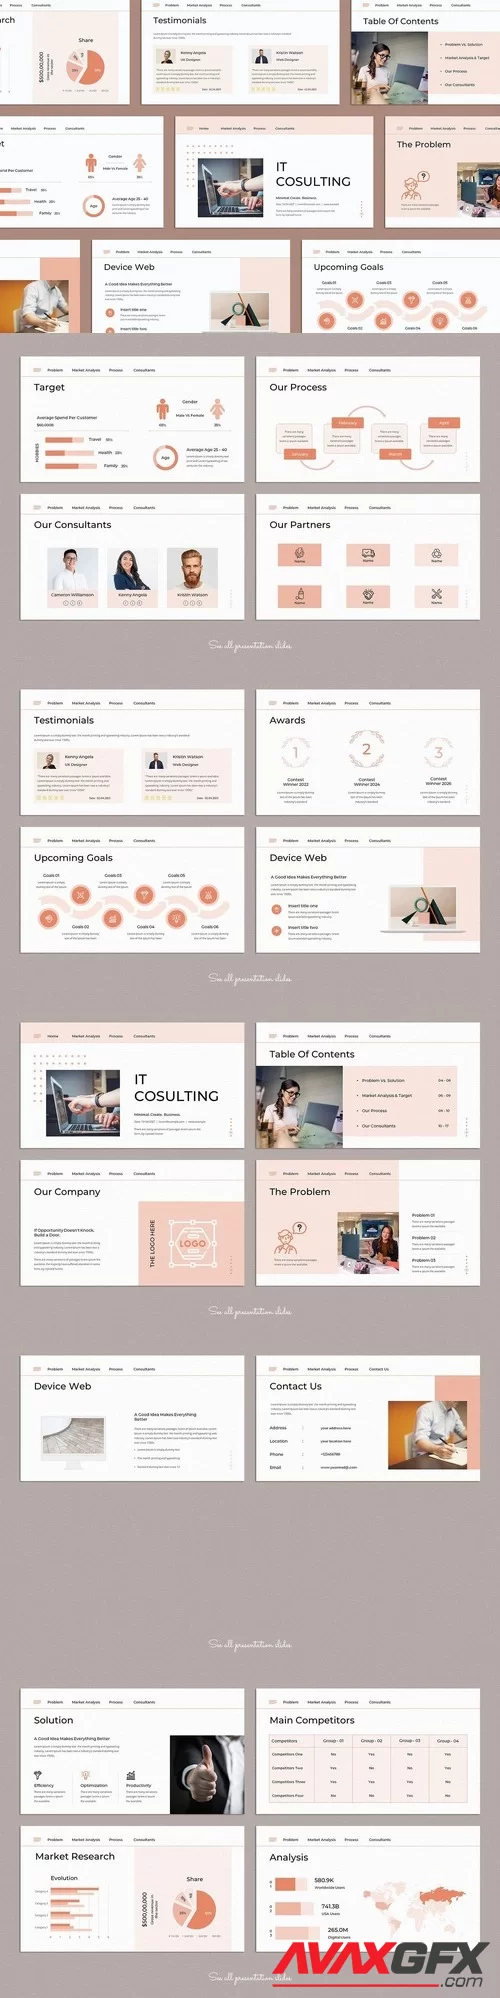 IT Consulting PowerPoint Presentation Template 2FJLUV7 [PPTX]